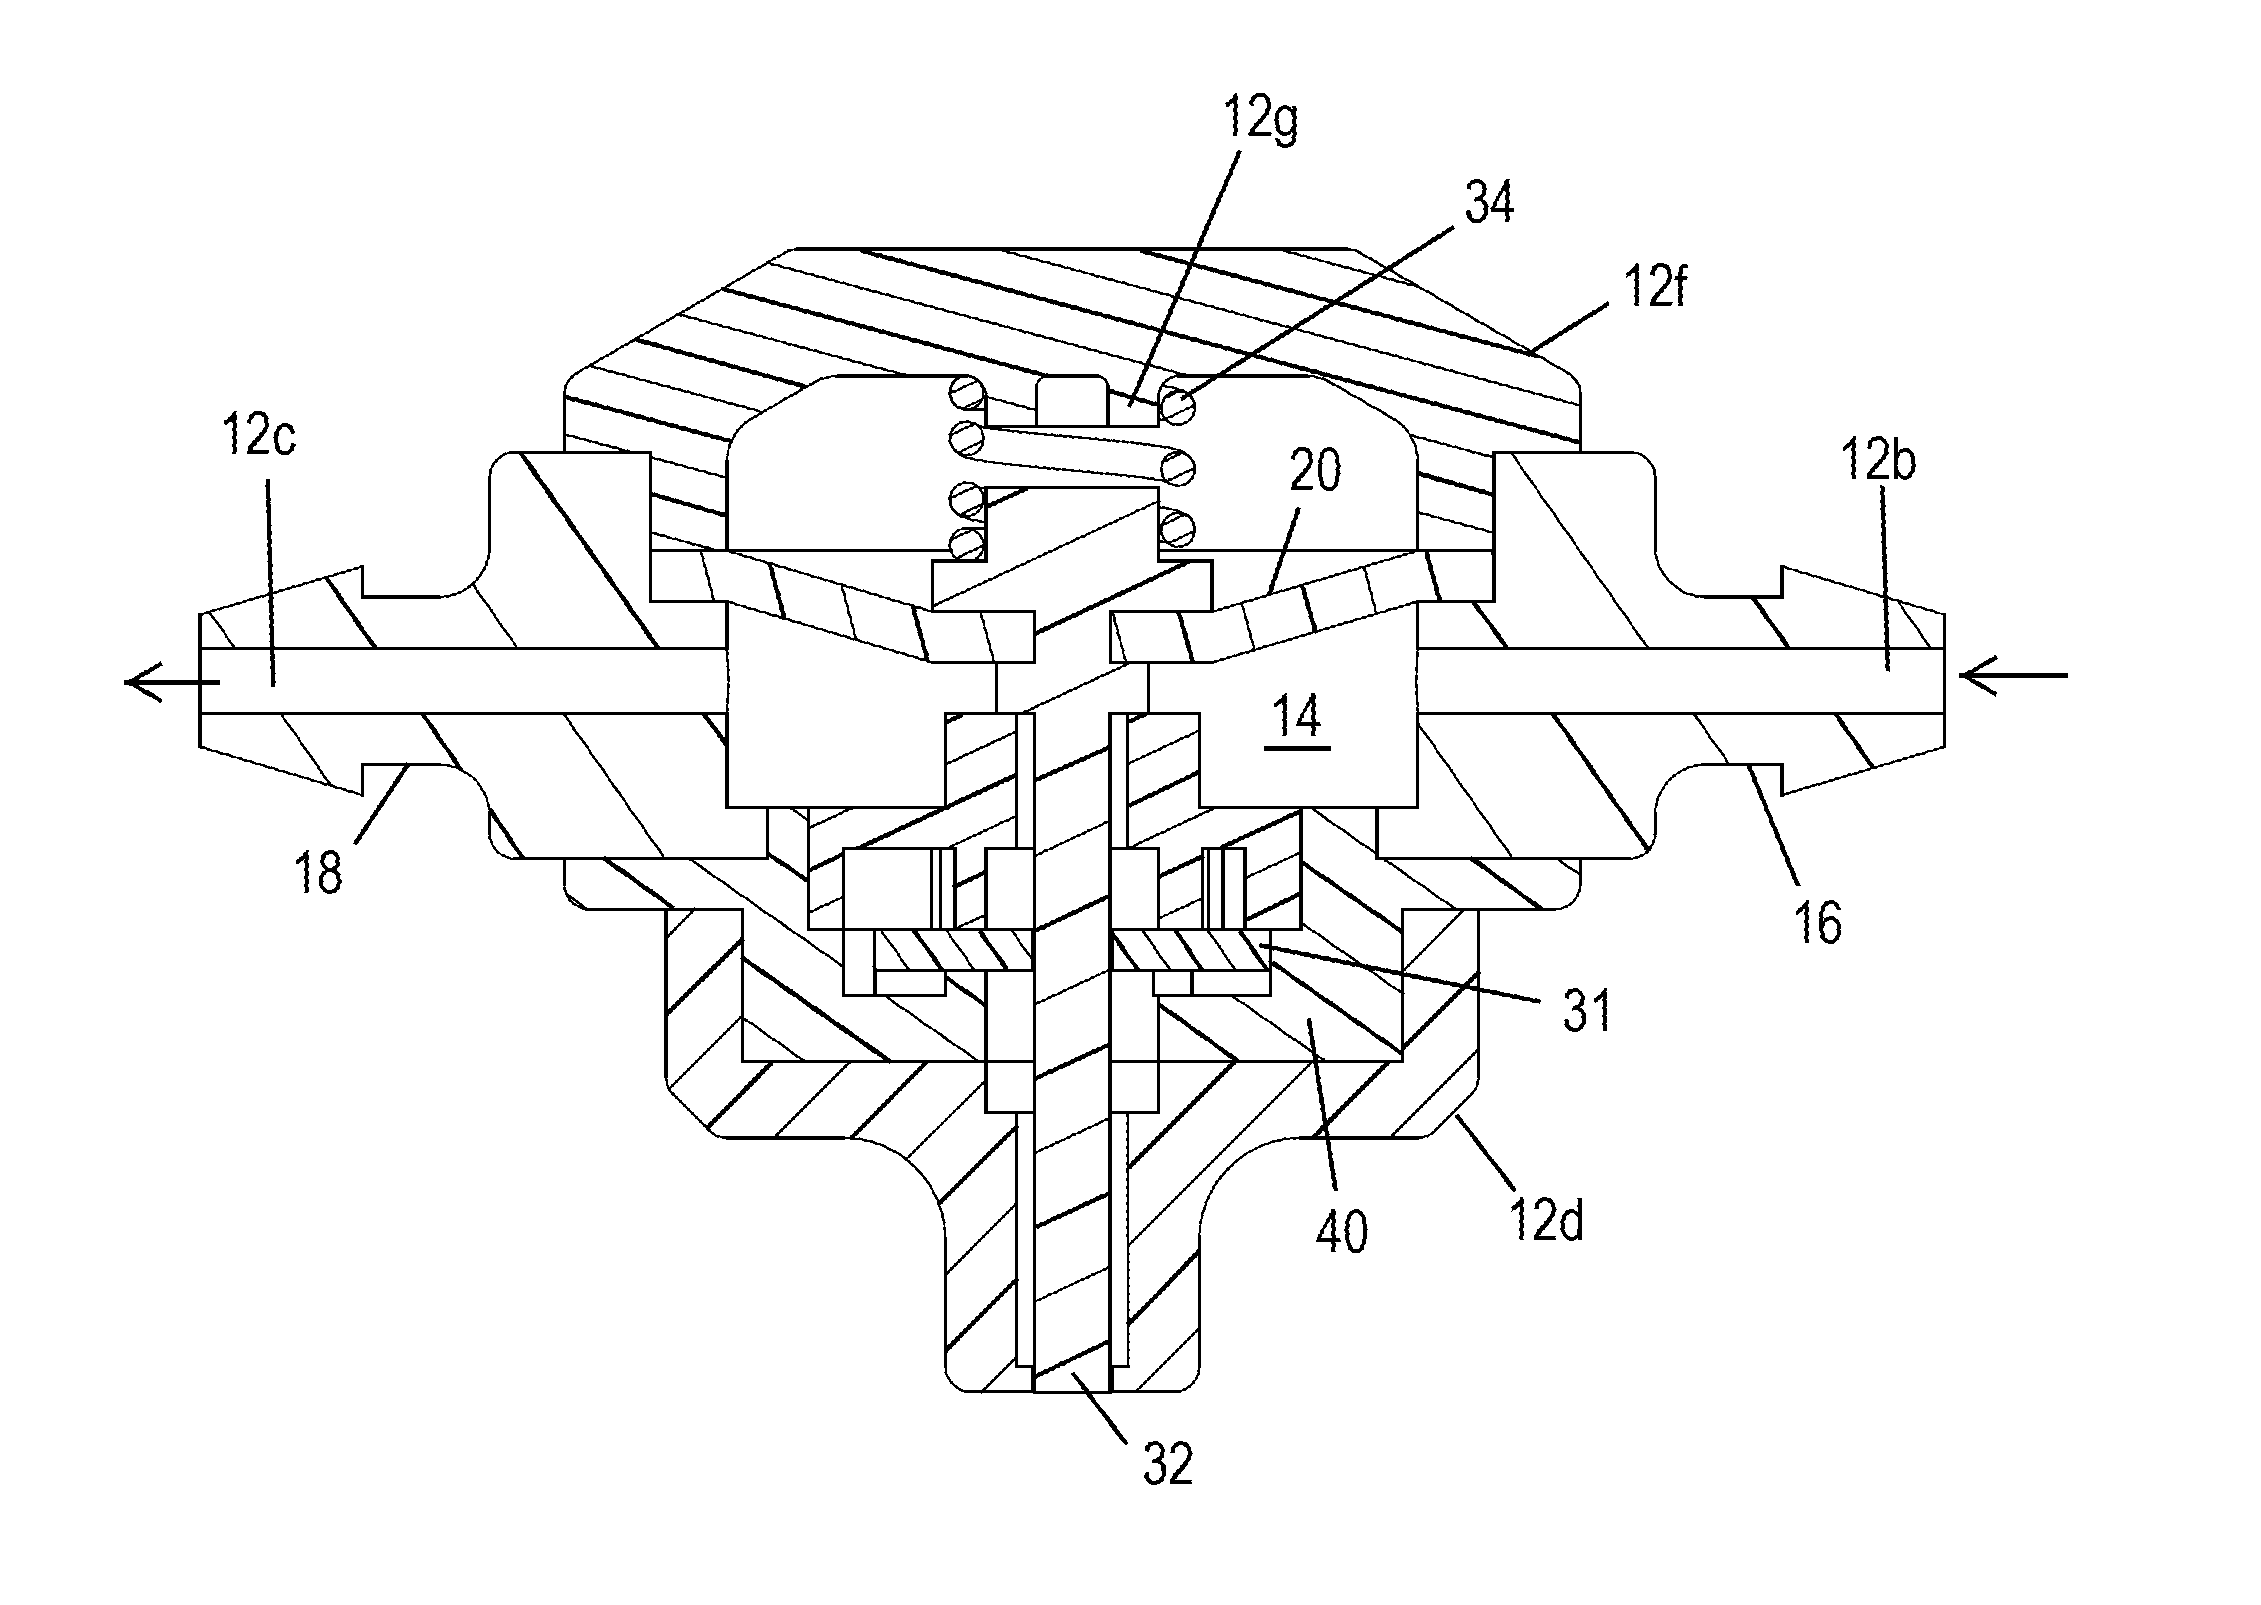 Low flow emitter with exit port closure mechanism for subsurface irrigation